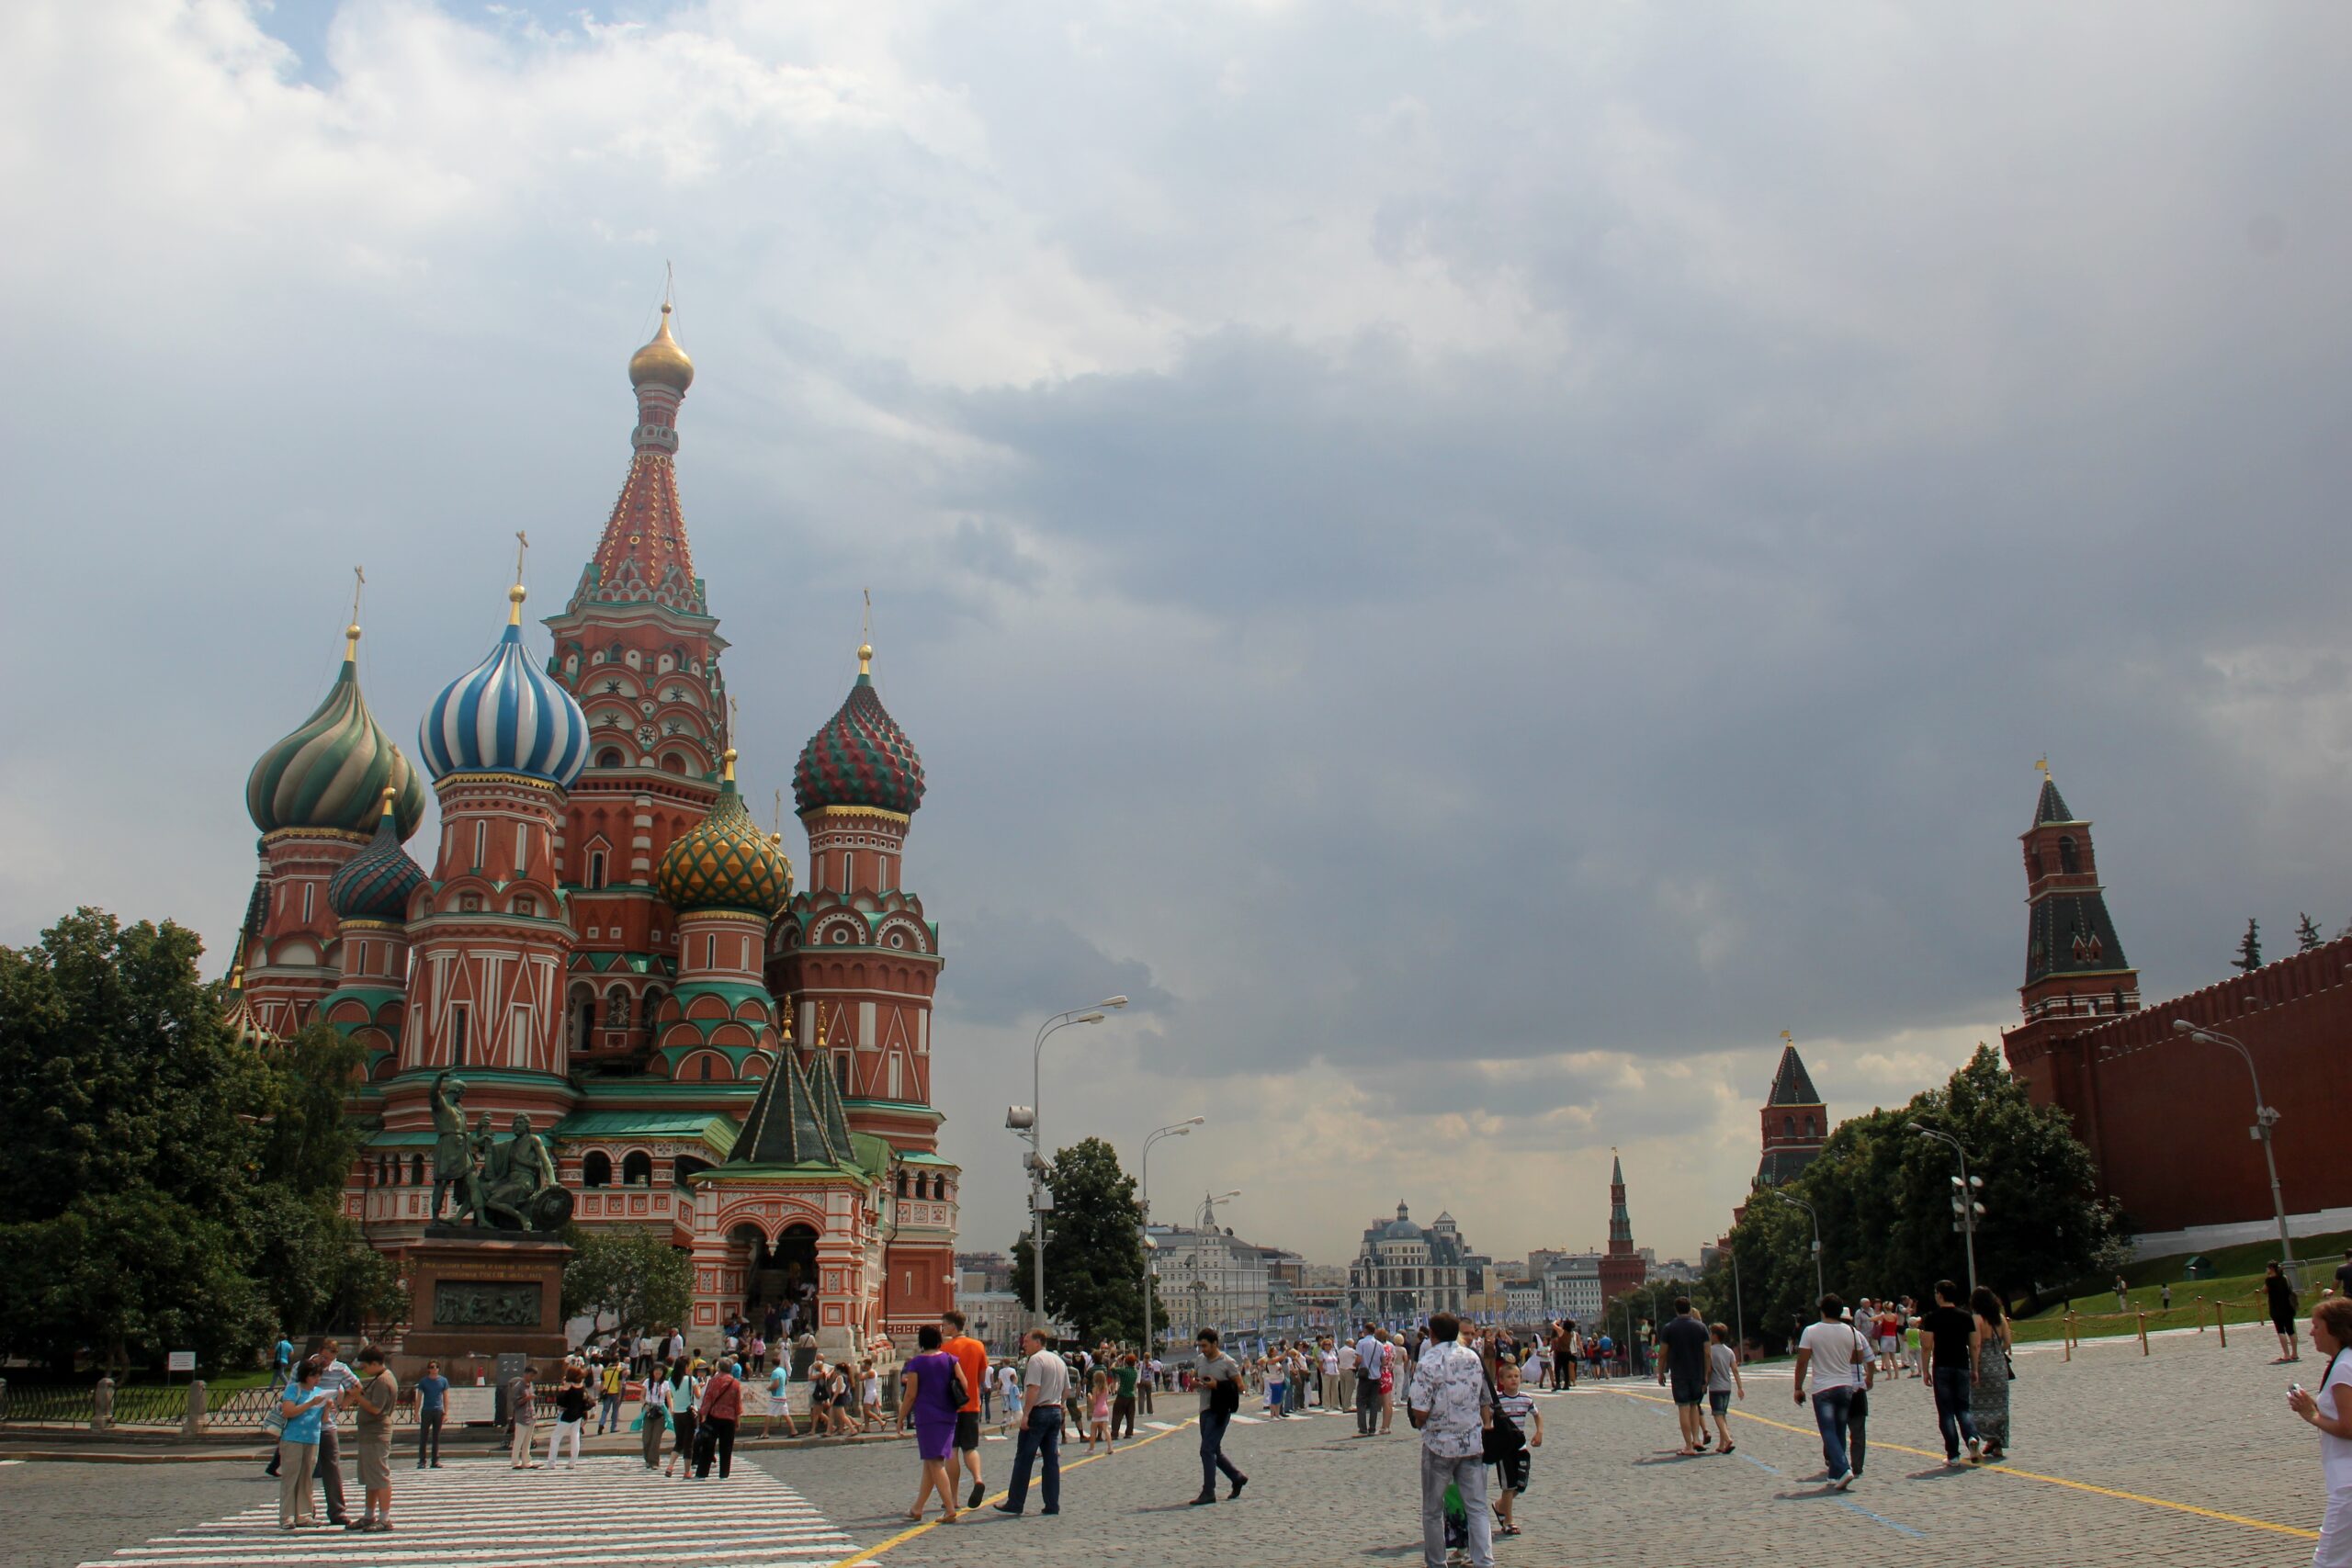 St. Basil's Cathedral, a quintessential Moscow tourist attraction, sits on the western edge of Red Square.